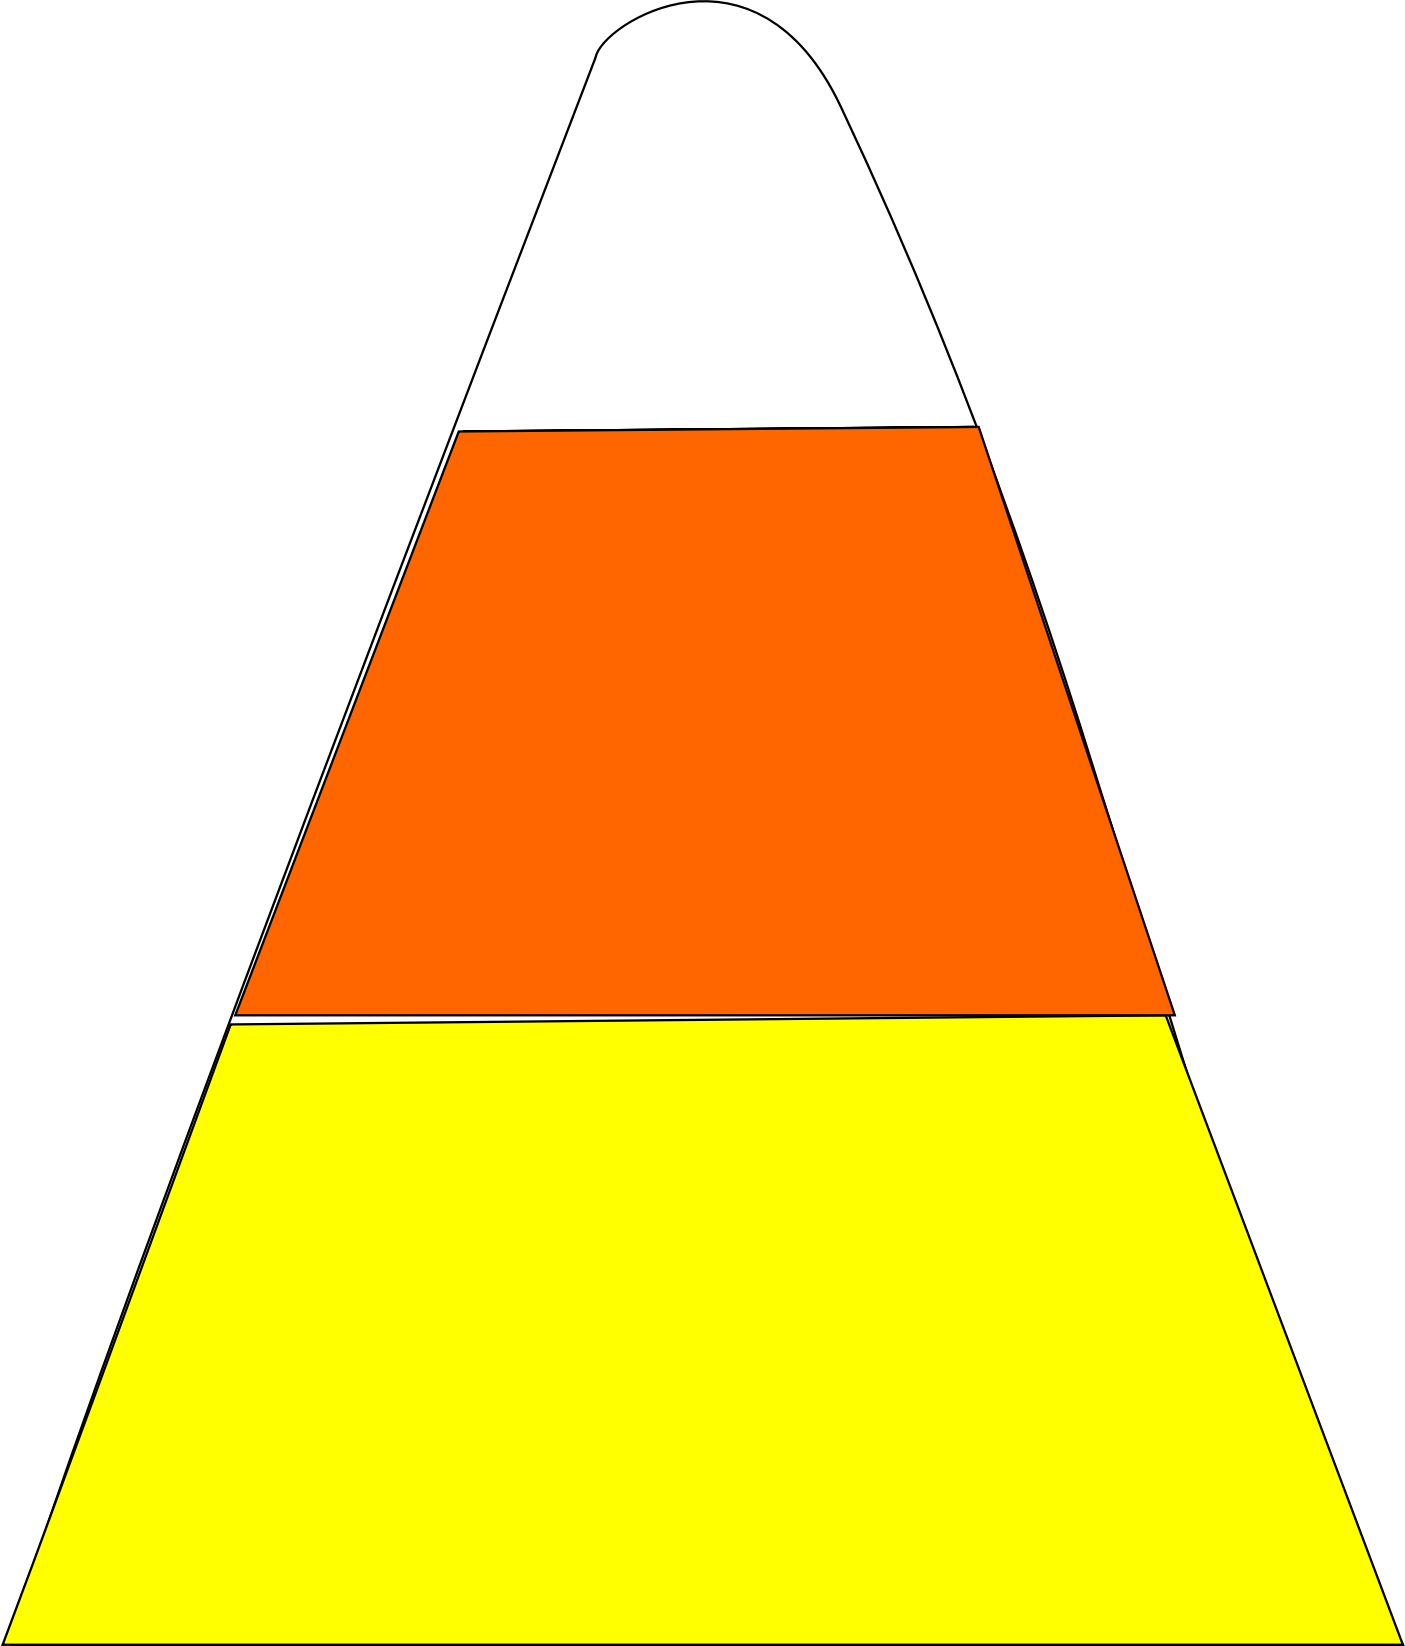 Candy Corn Clipart - 47 cliparts